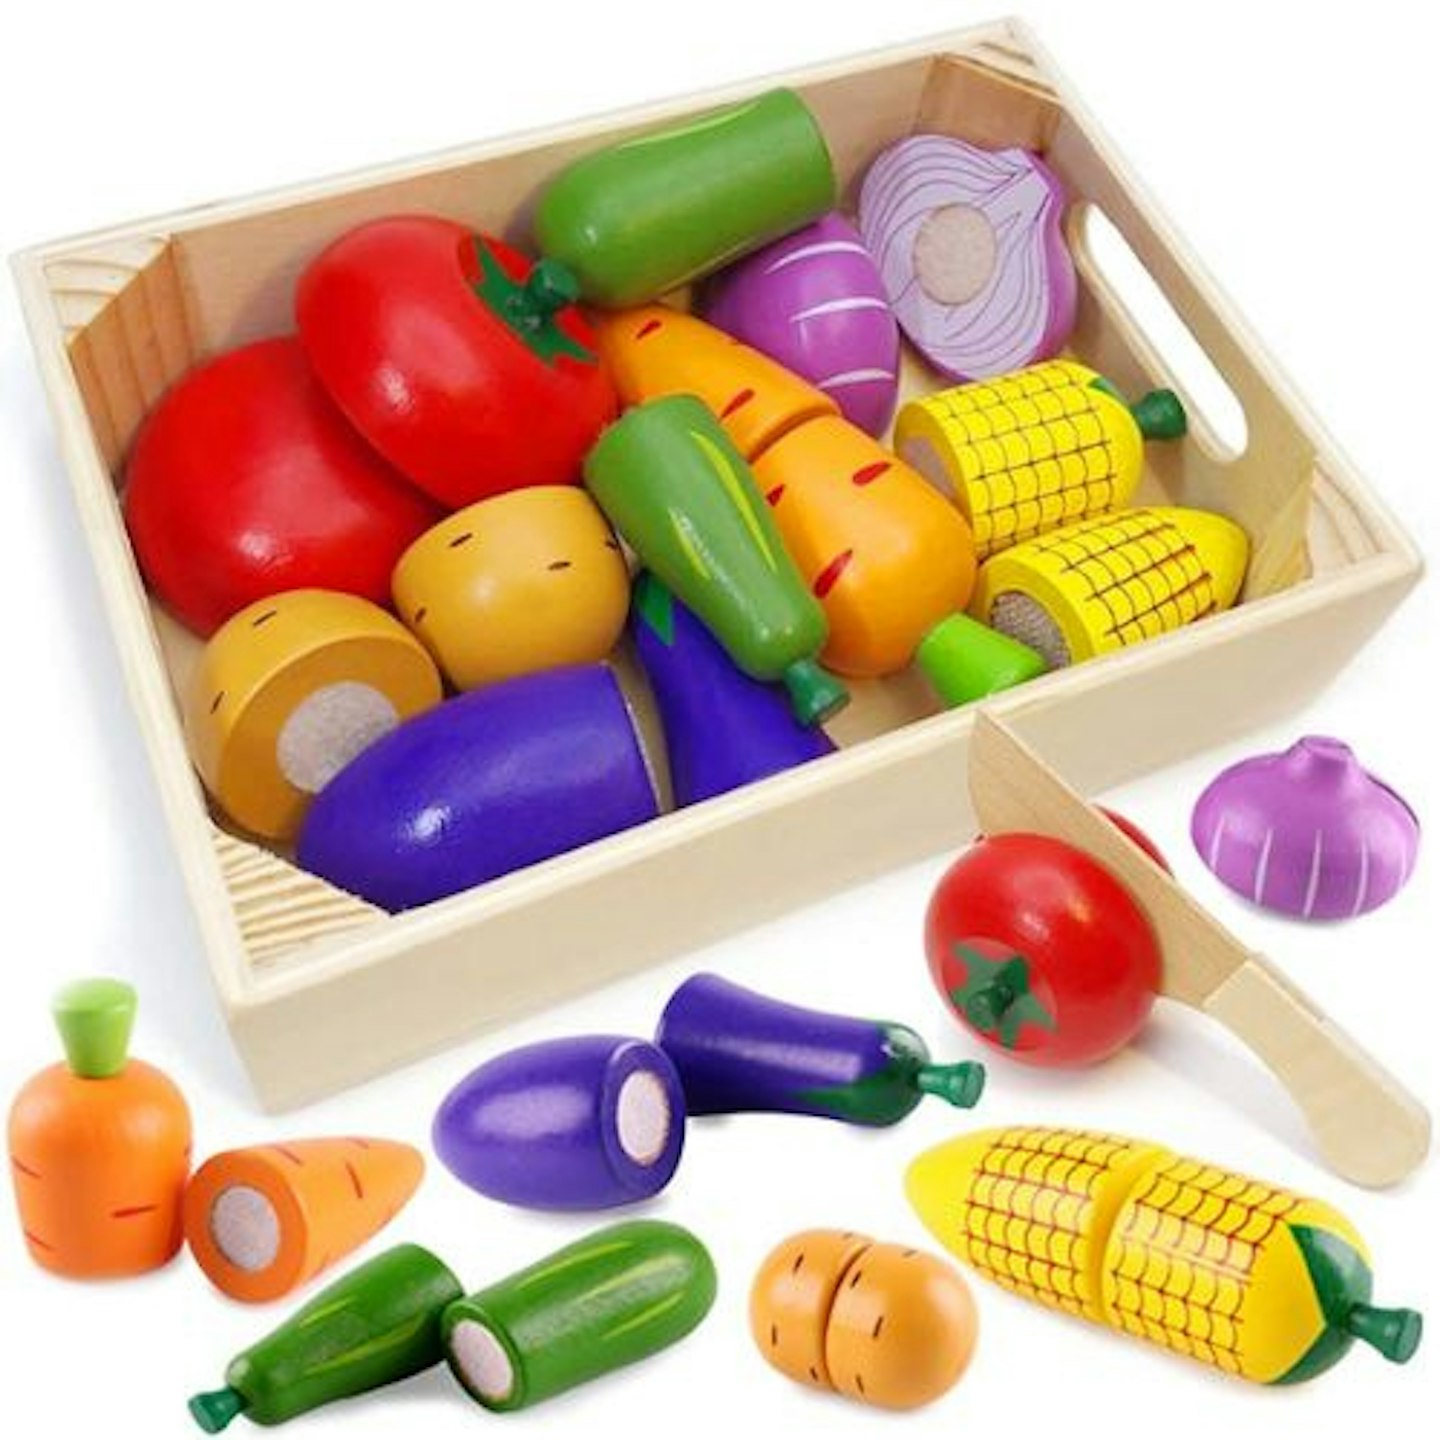 Airlab Wooden Play Food for Kids